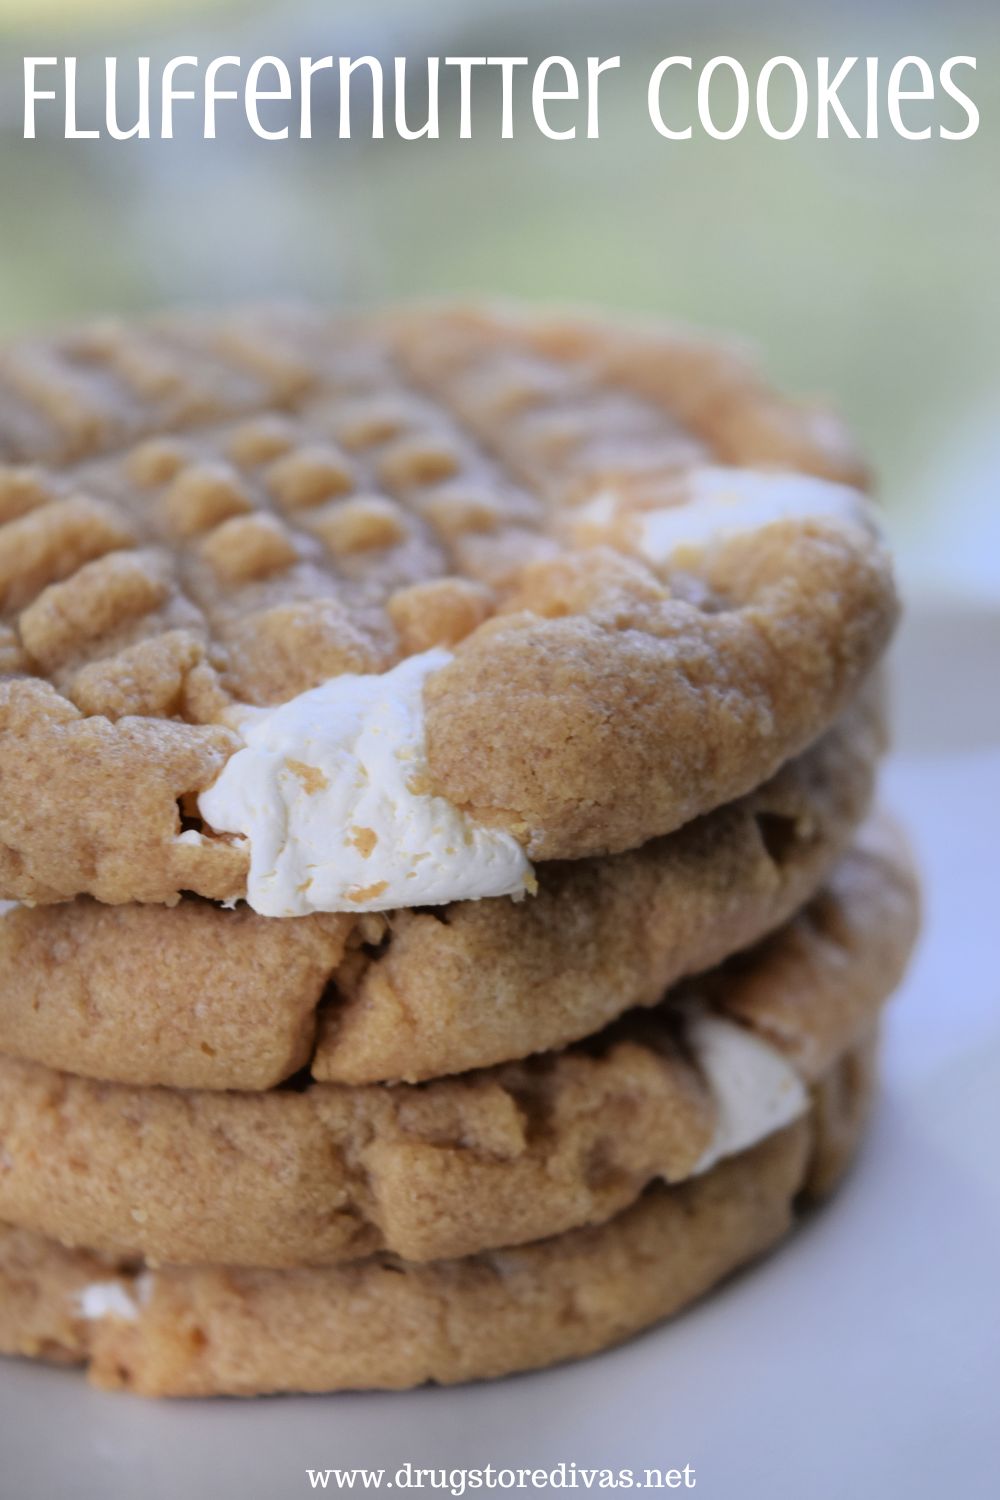 Four marshmallow and peanut butter cookies stacked on top of each other with the words 